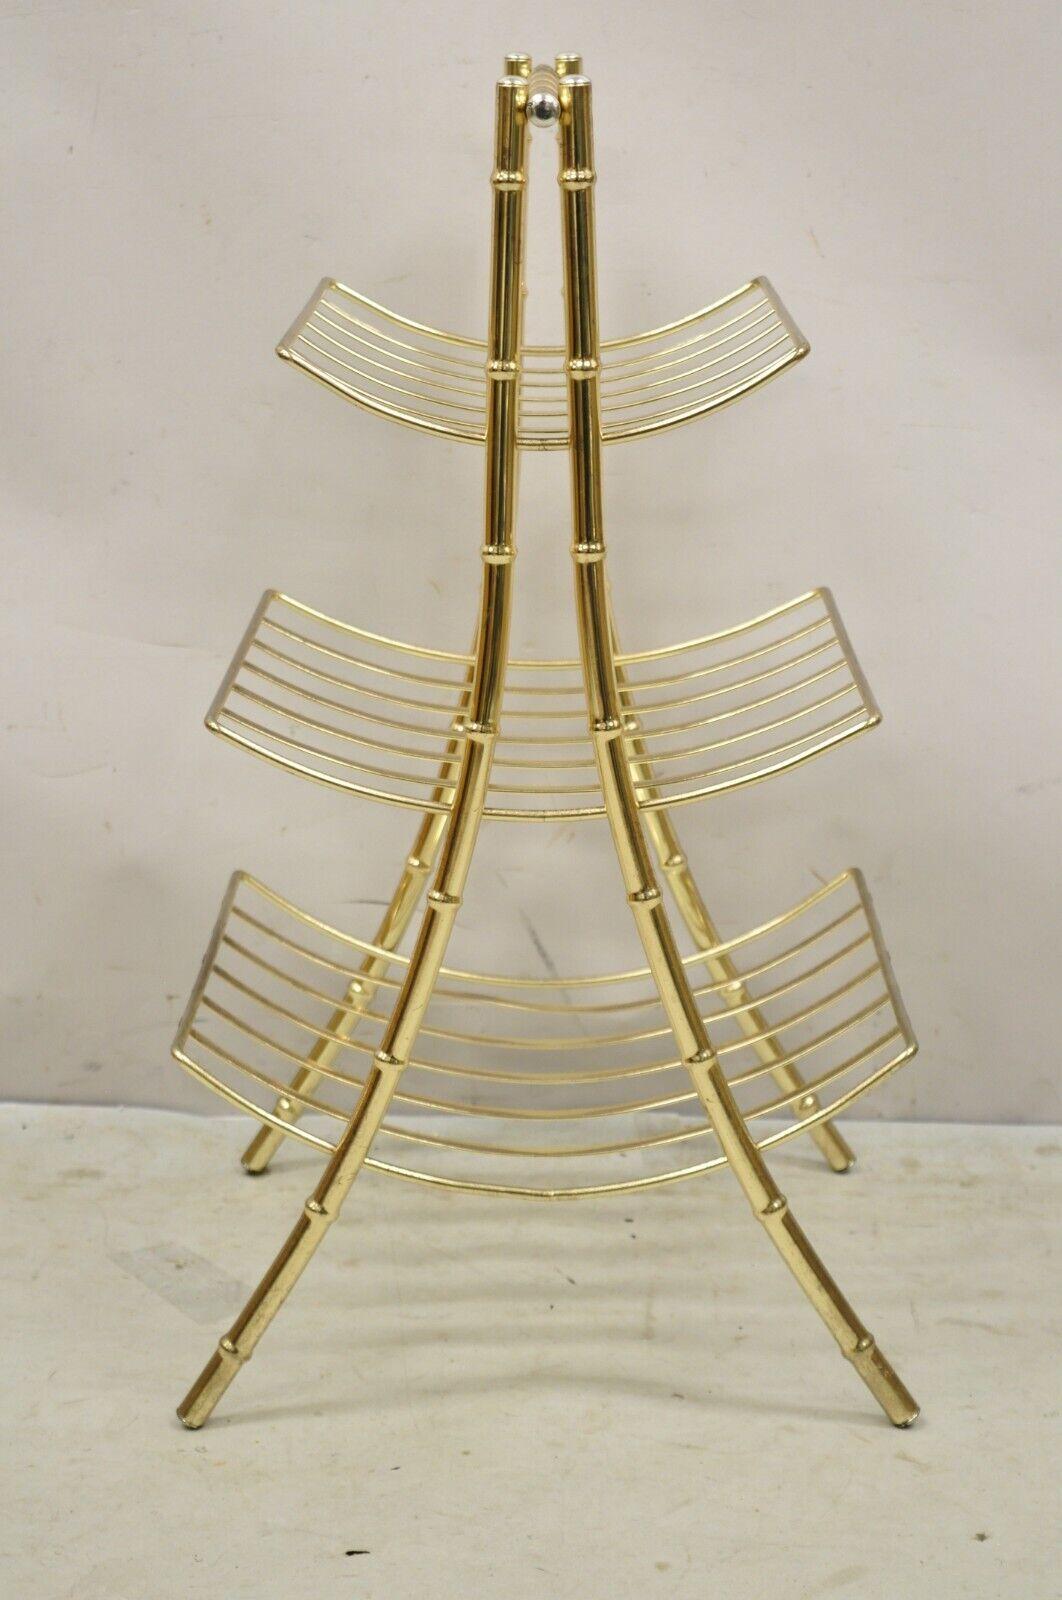 Vintage Gold Metal Faux Bamboo 3 Tier Hollywood Regency Magazine Rack Stand. Circa Late 20th Century. Measurements: 27